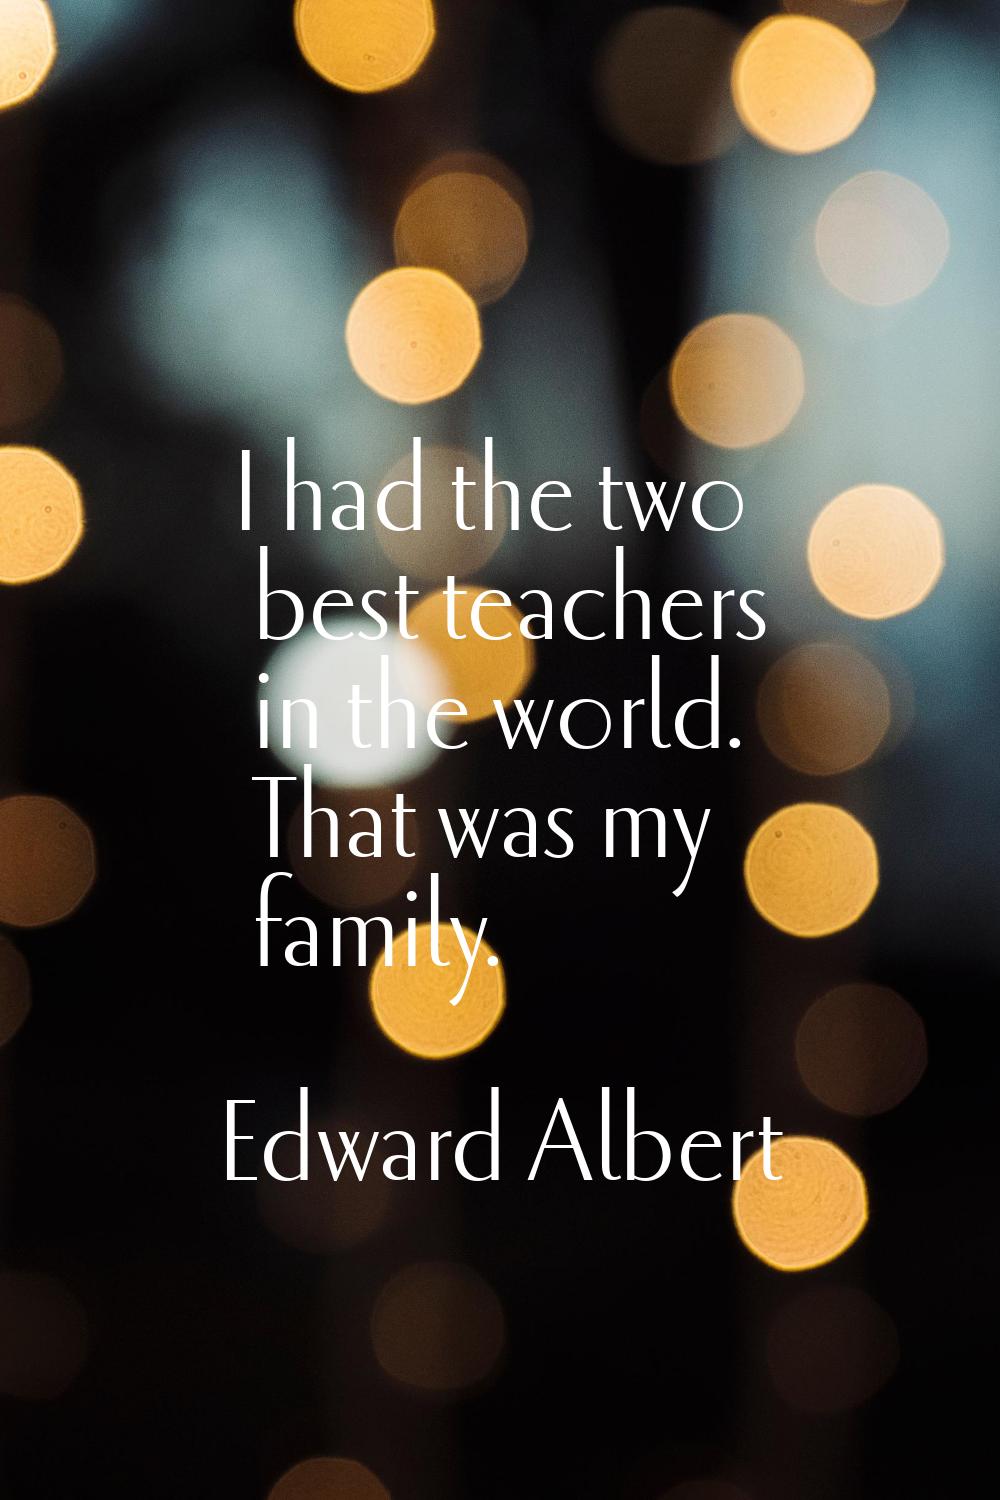 I had the two best teachers in the world. That was my family.